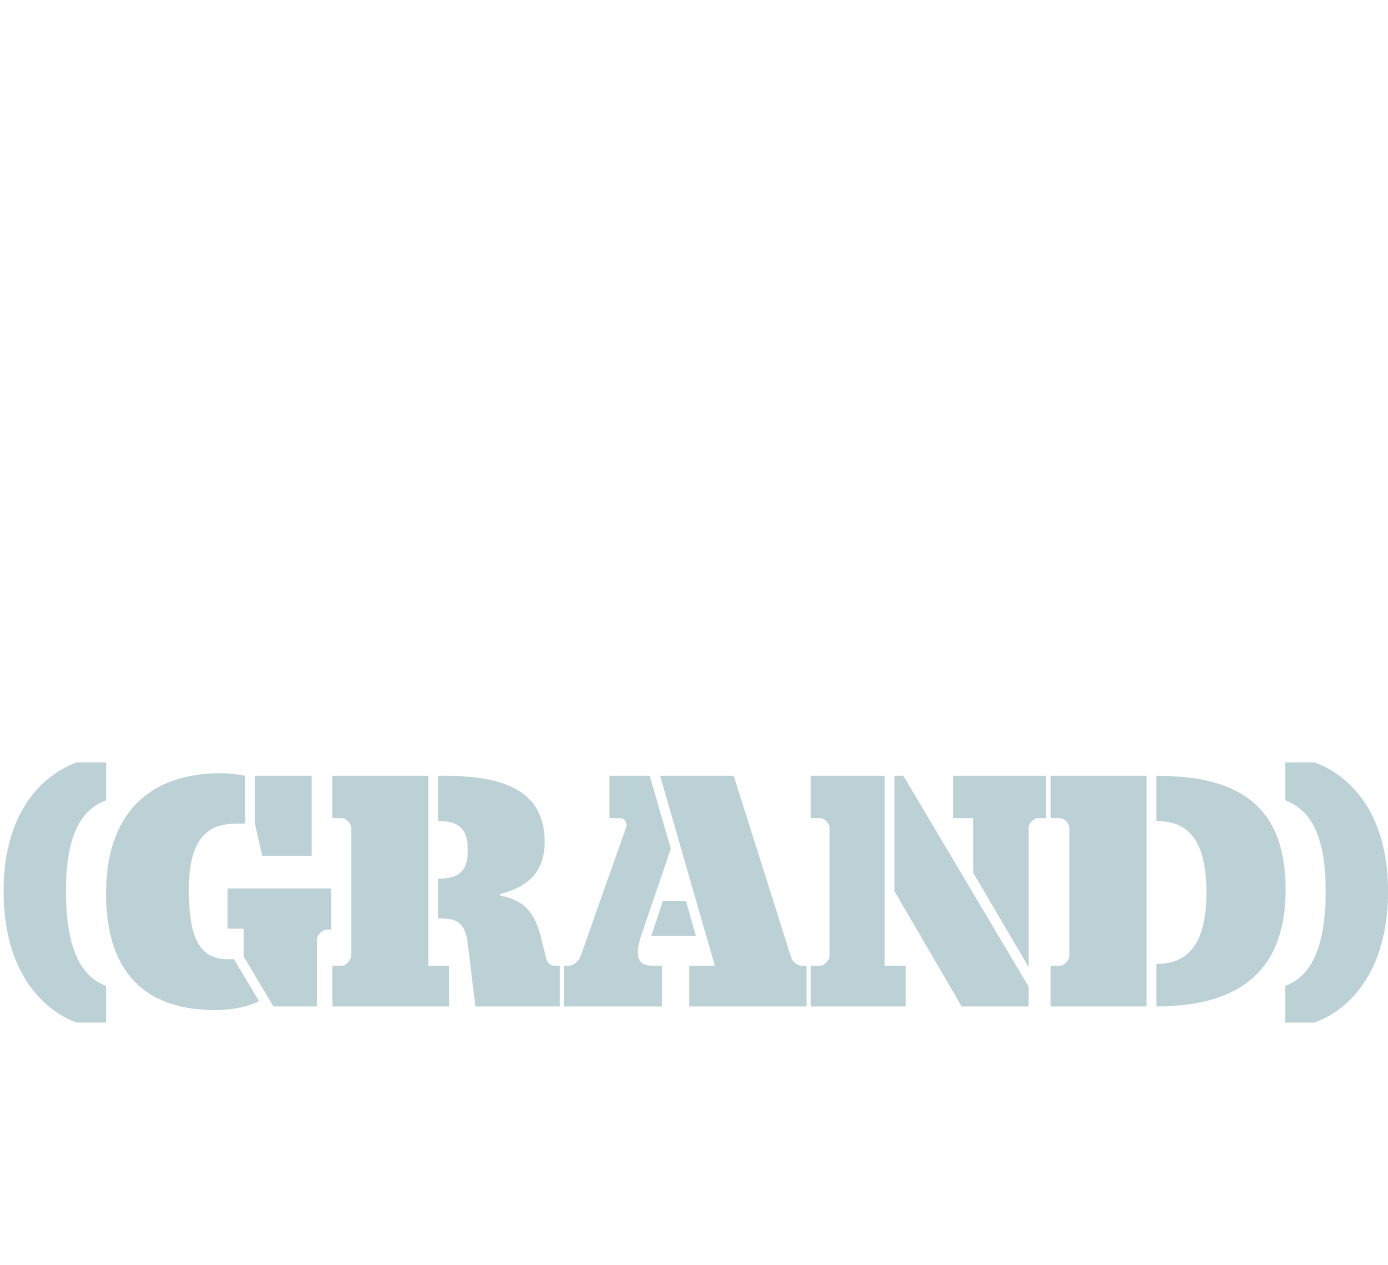 In The Name Of The (Grand) Father